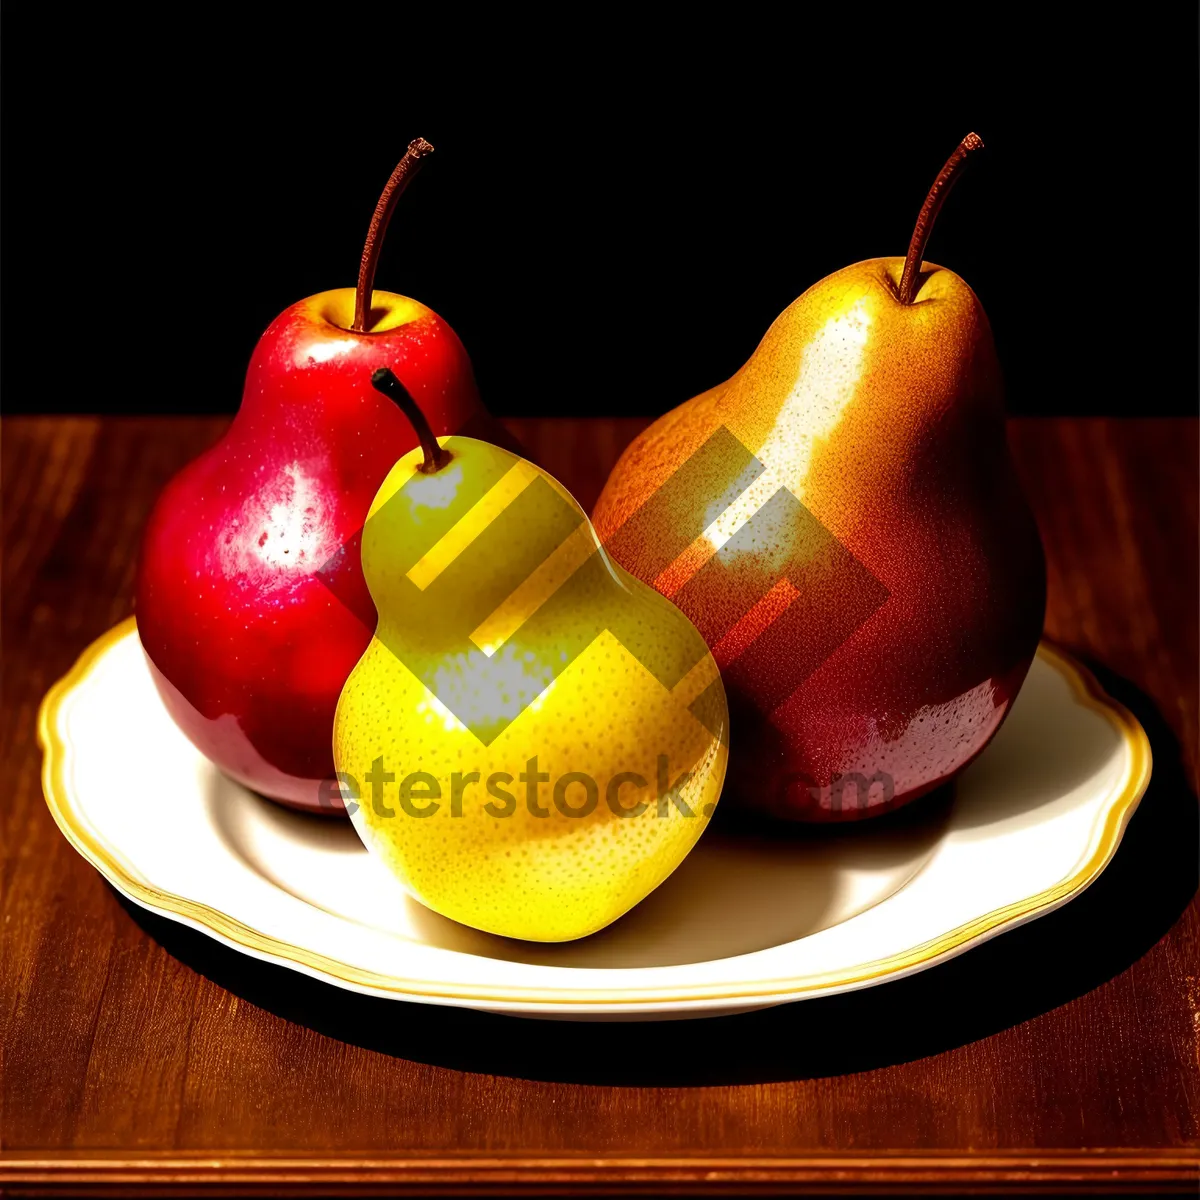 Picture of Juicy and Refreshing Pear: Healthy and Delicious Fruit!